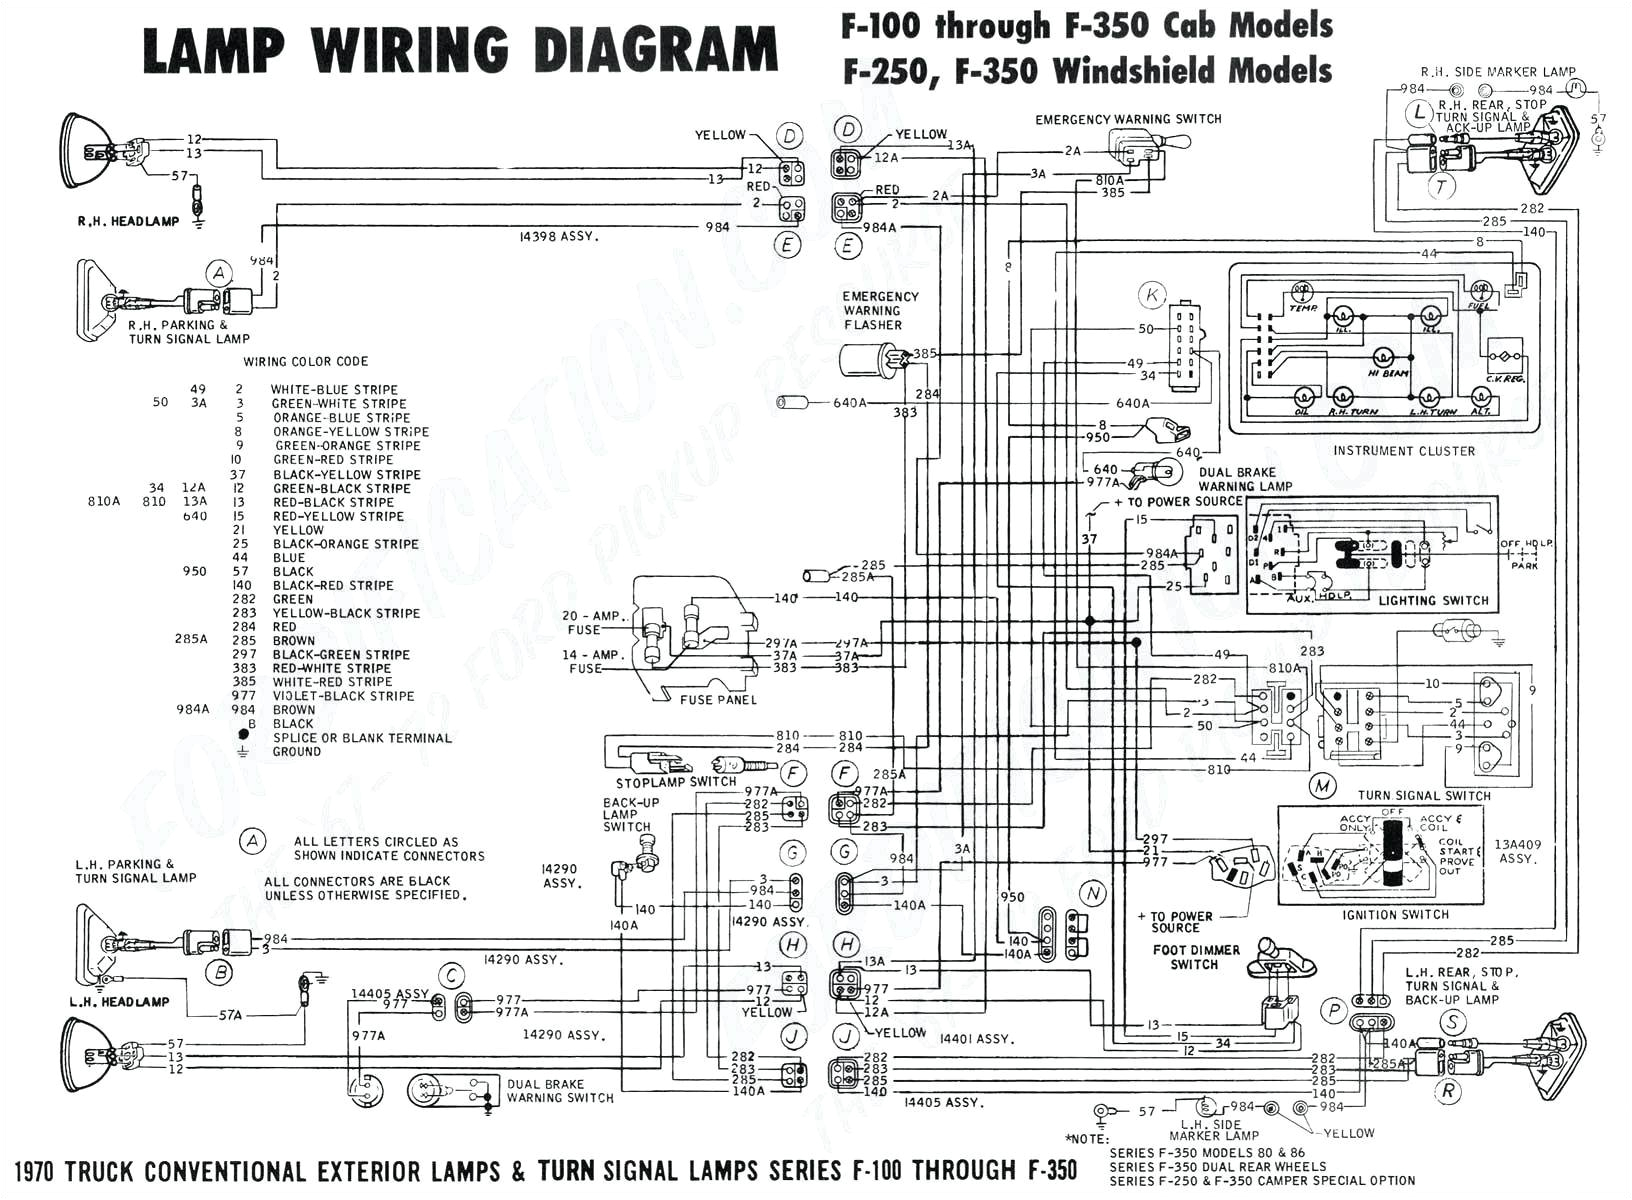 electric space heater wiring diagram awesome 3 phase heater wiring schematics wiring diagrams e280a2 jpg